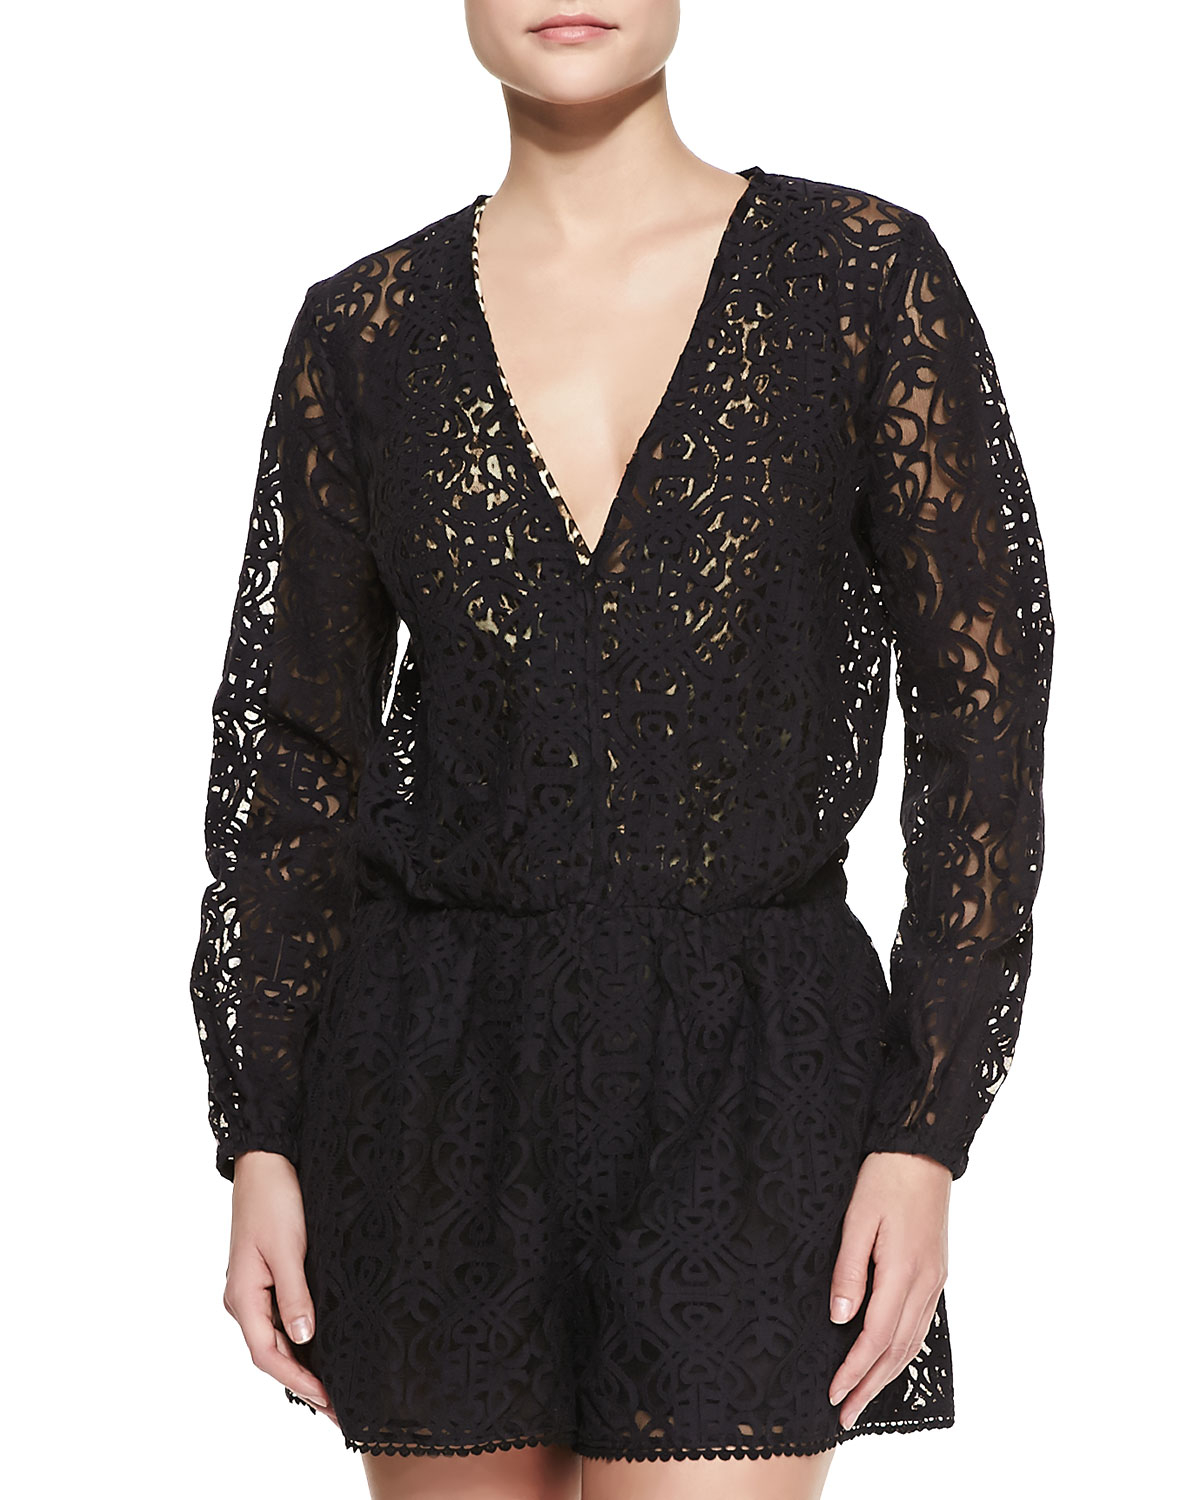 Lyst - Zimmermann Mesh Scout Playsuit Coverup in Black